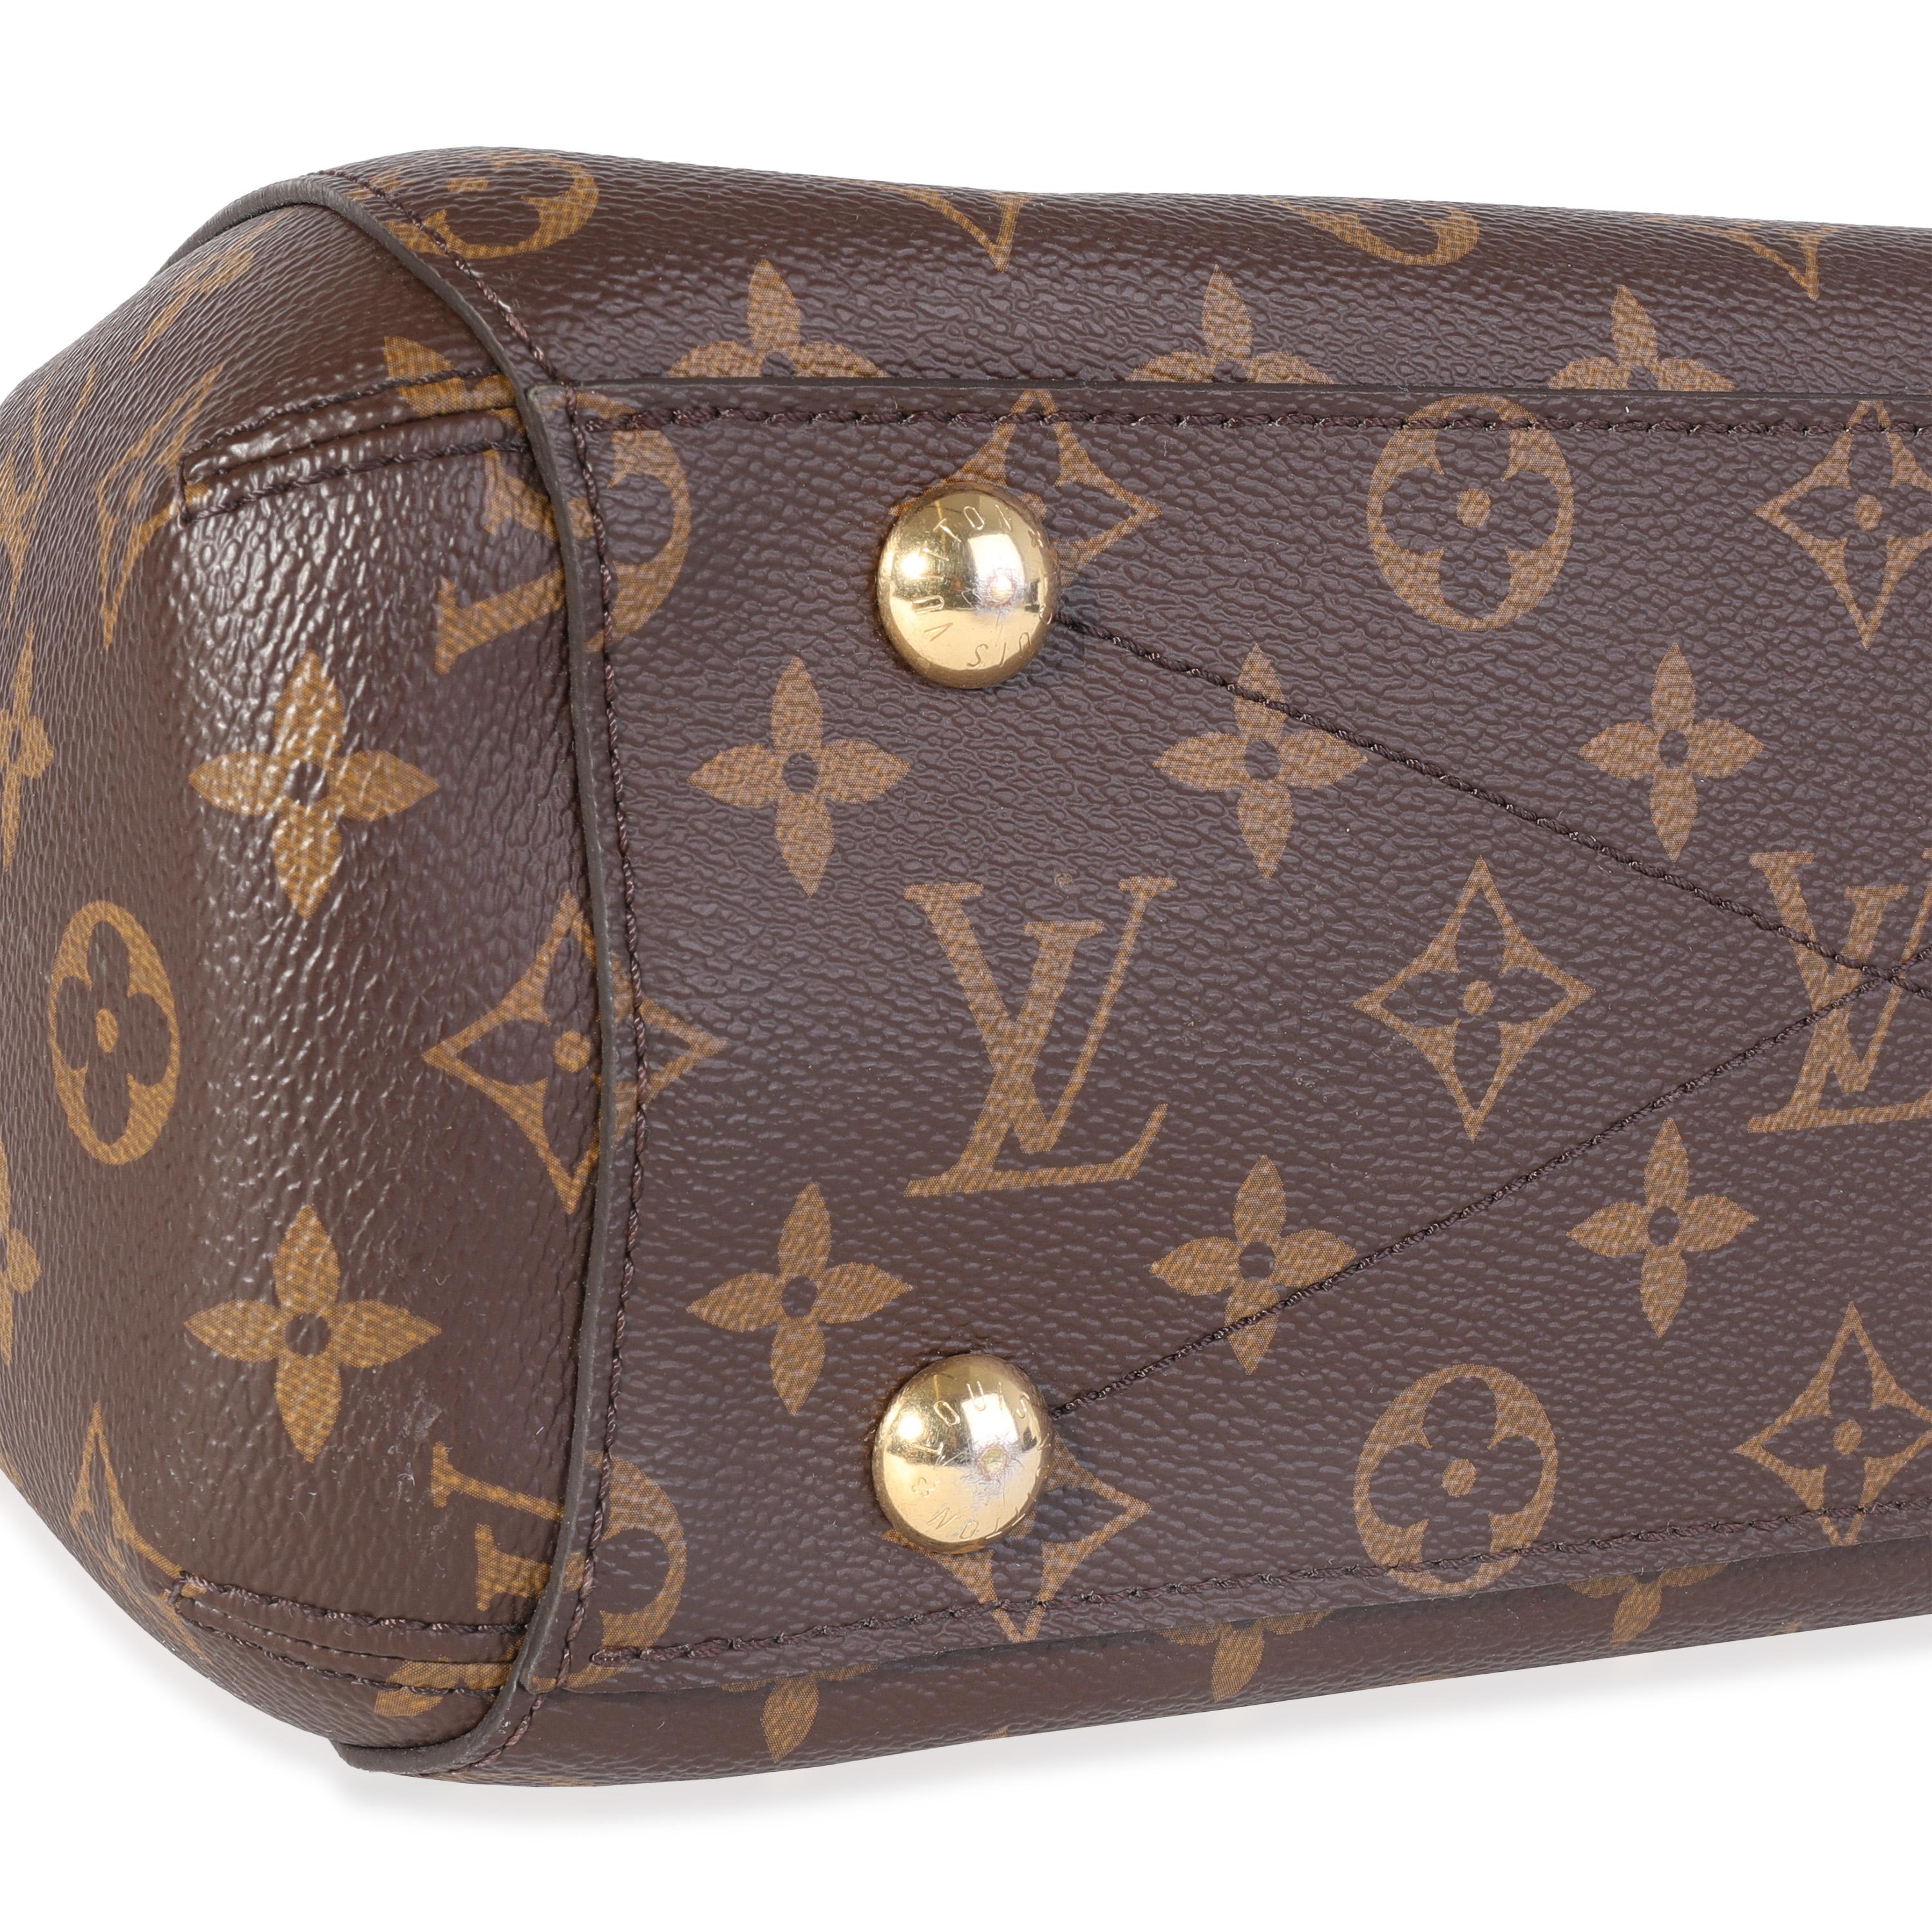 Listing Title: Louis Vuitton Monogram Canvas Montaigne BB
SKU: 120106
MSRP: 2780.00

Condition: Pre-owned
Handbag Condition: Very Good
Condition Comments: Feet scratched. Handles and trim show some discoloration. Interior shows signs of use.

Brand: